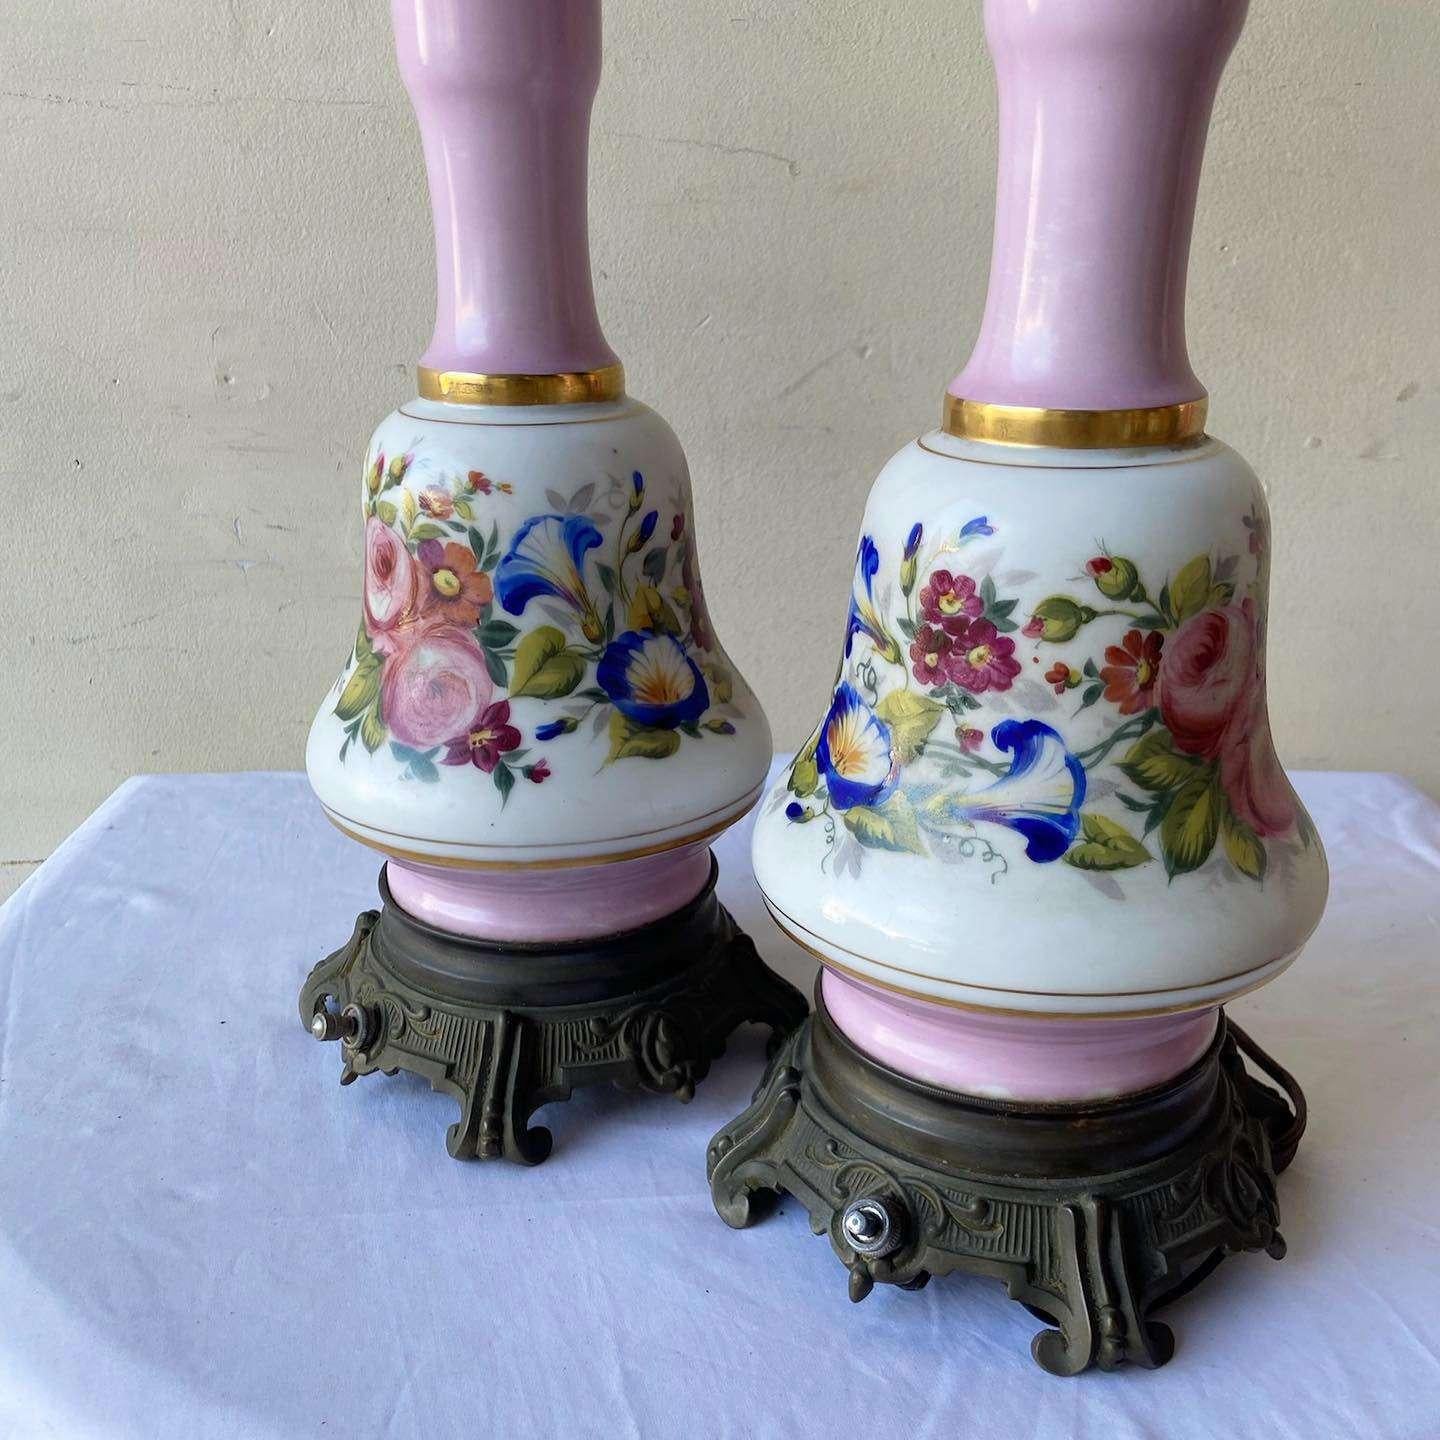 Vintage French Pink and White Porcelain and Brass Table Lamps - a Pair For Sale 2